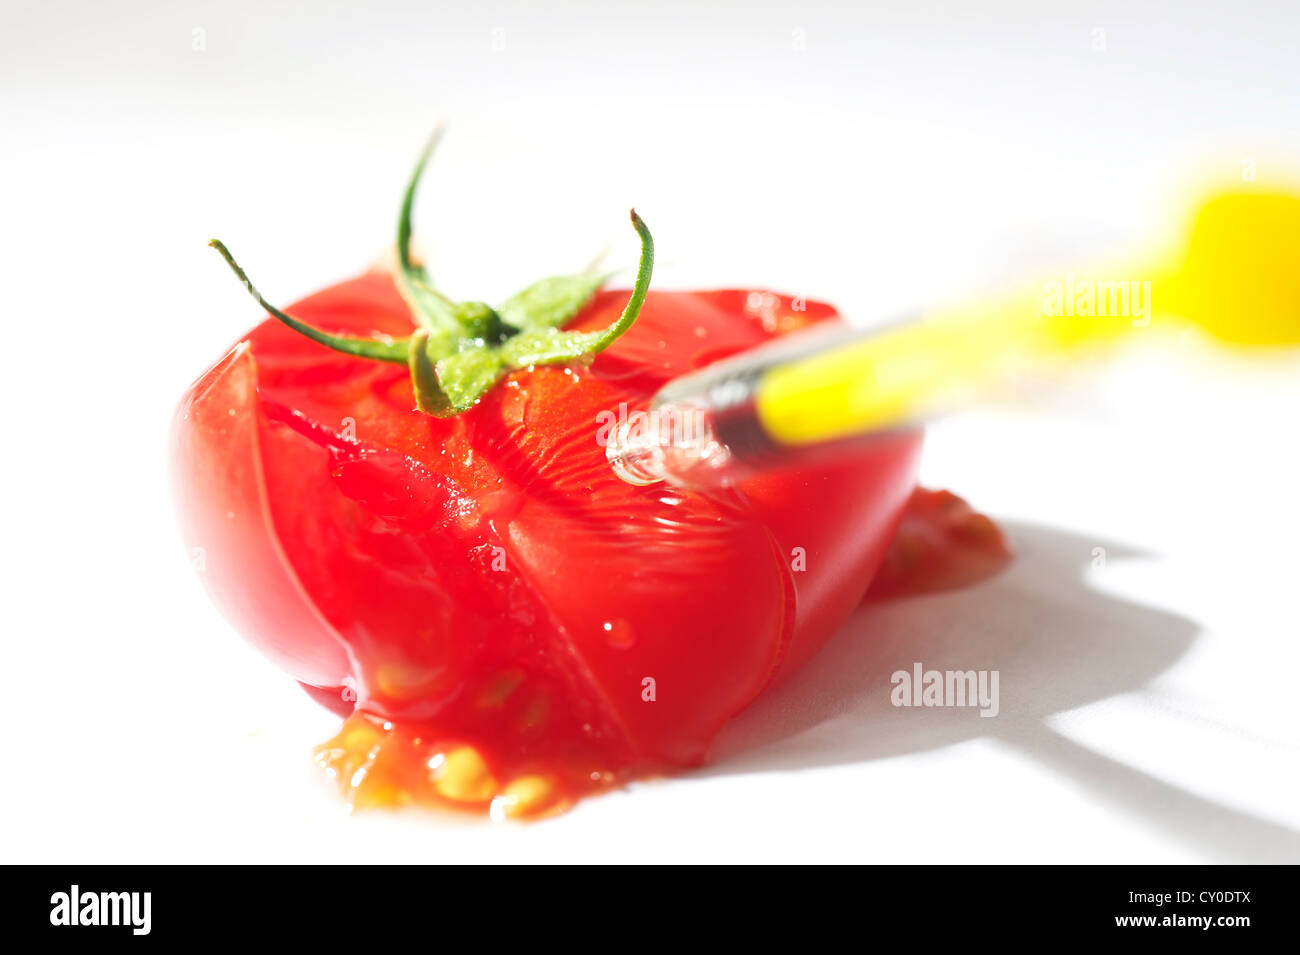 squashed tomato being injected by a needle. GM foods Stock Photo